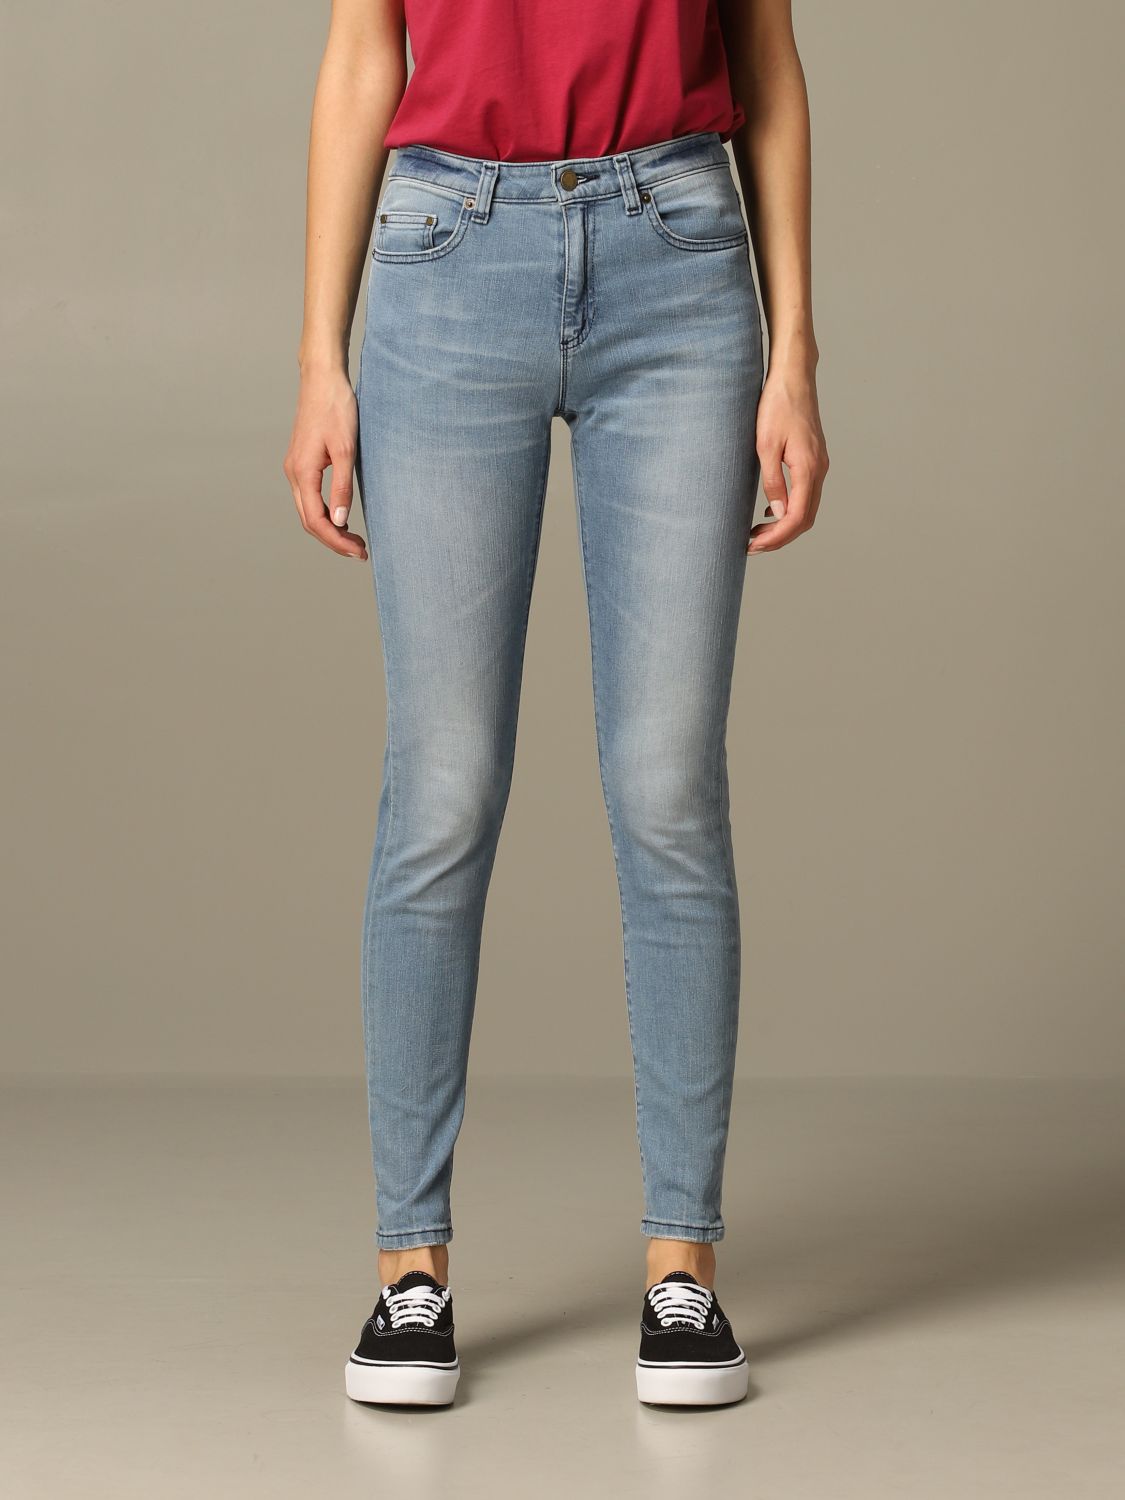 Michael Kors Outlet: jeans for woman - Blue | Michael Kors jeans MS99CGY4V6  online on 